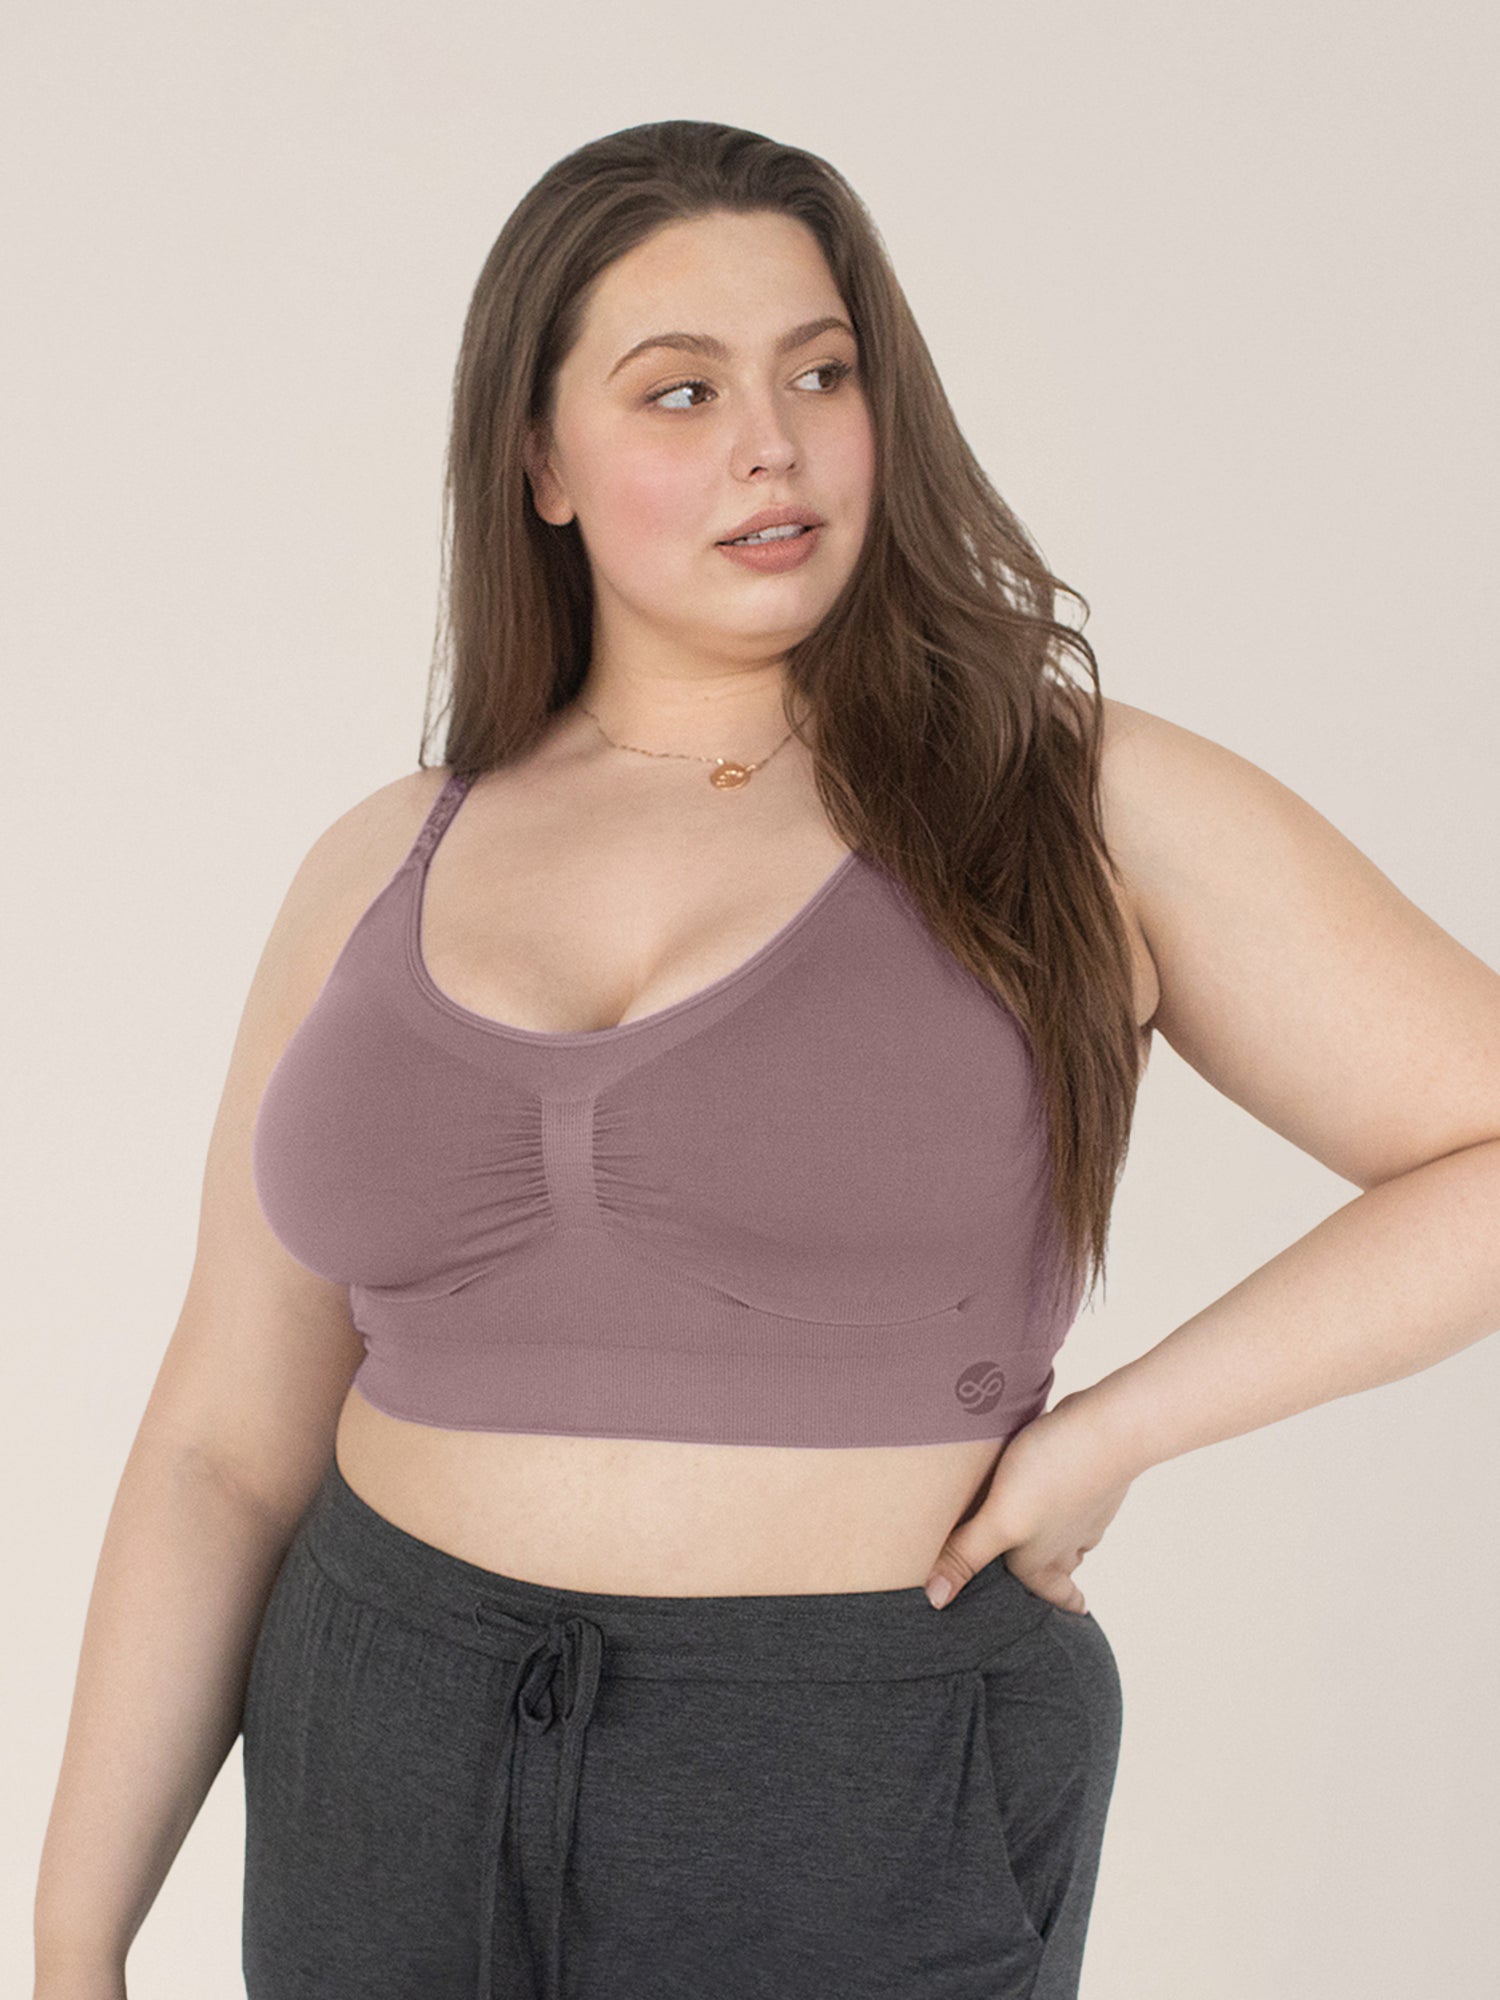 Still looking for a comfy wireless bra for fuller bust? Here comes